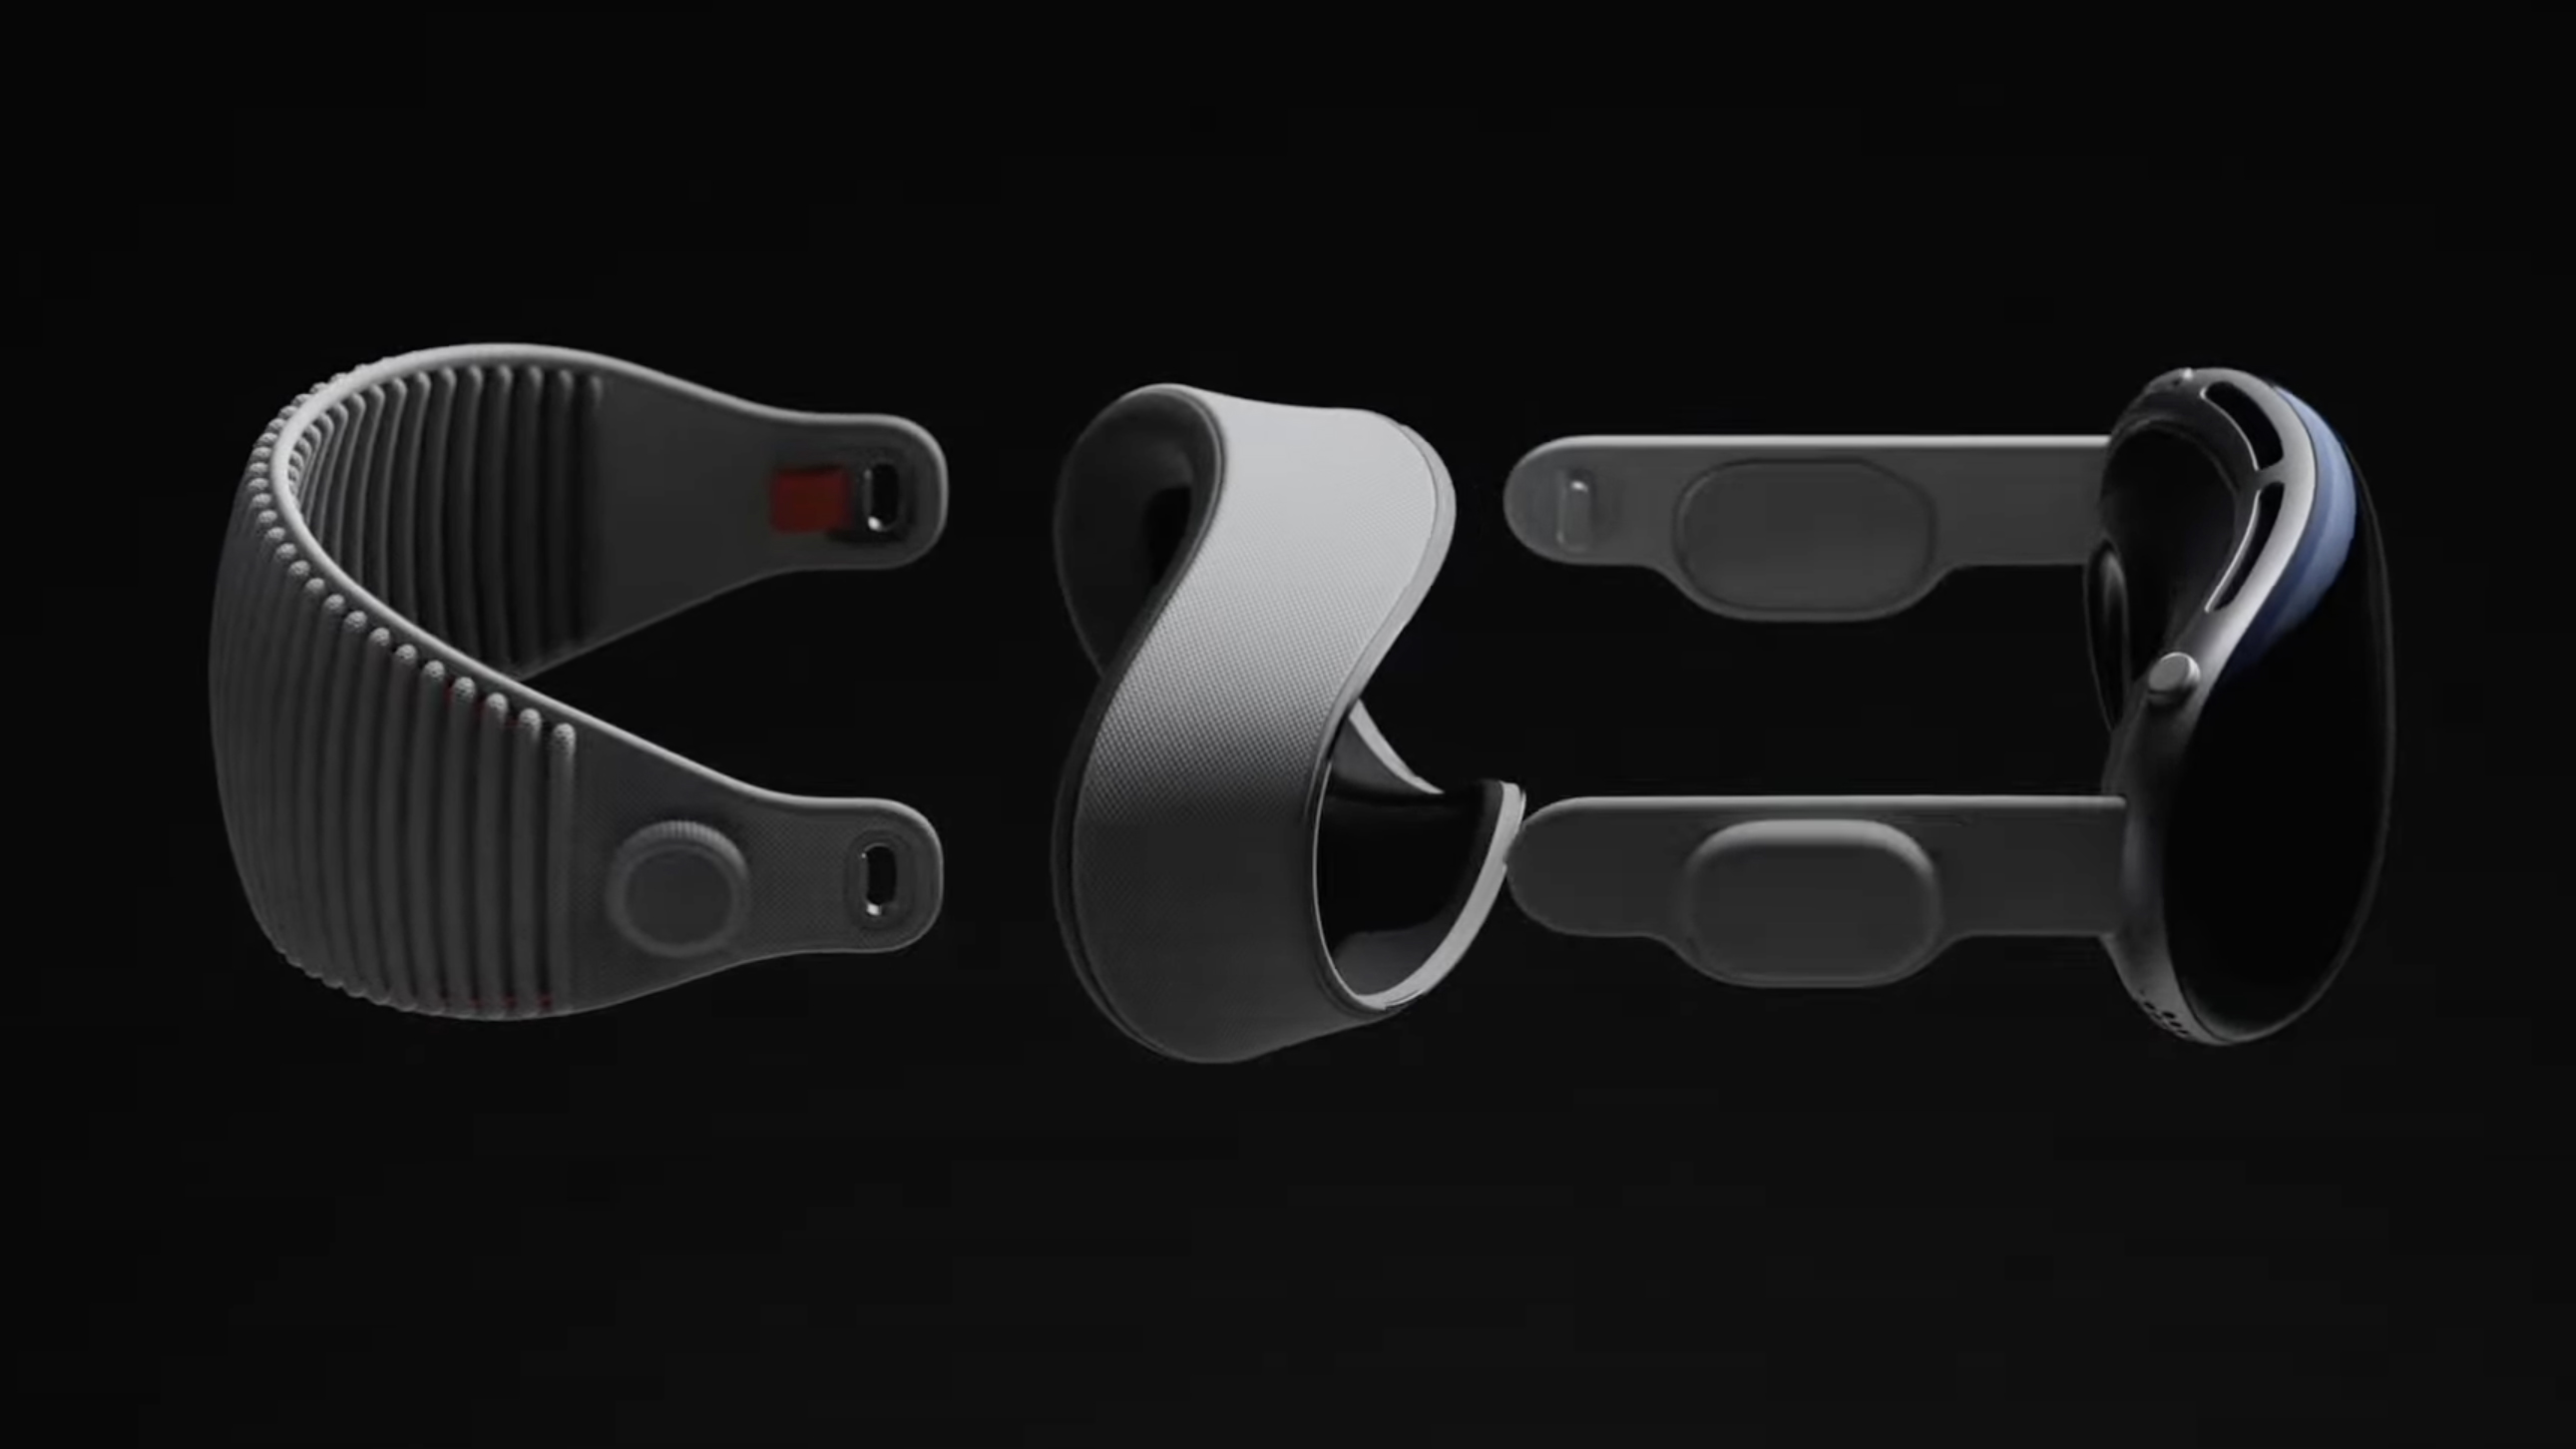 The Apple Vision Pro headset split into three parts on a black background